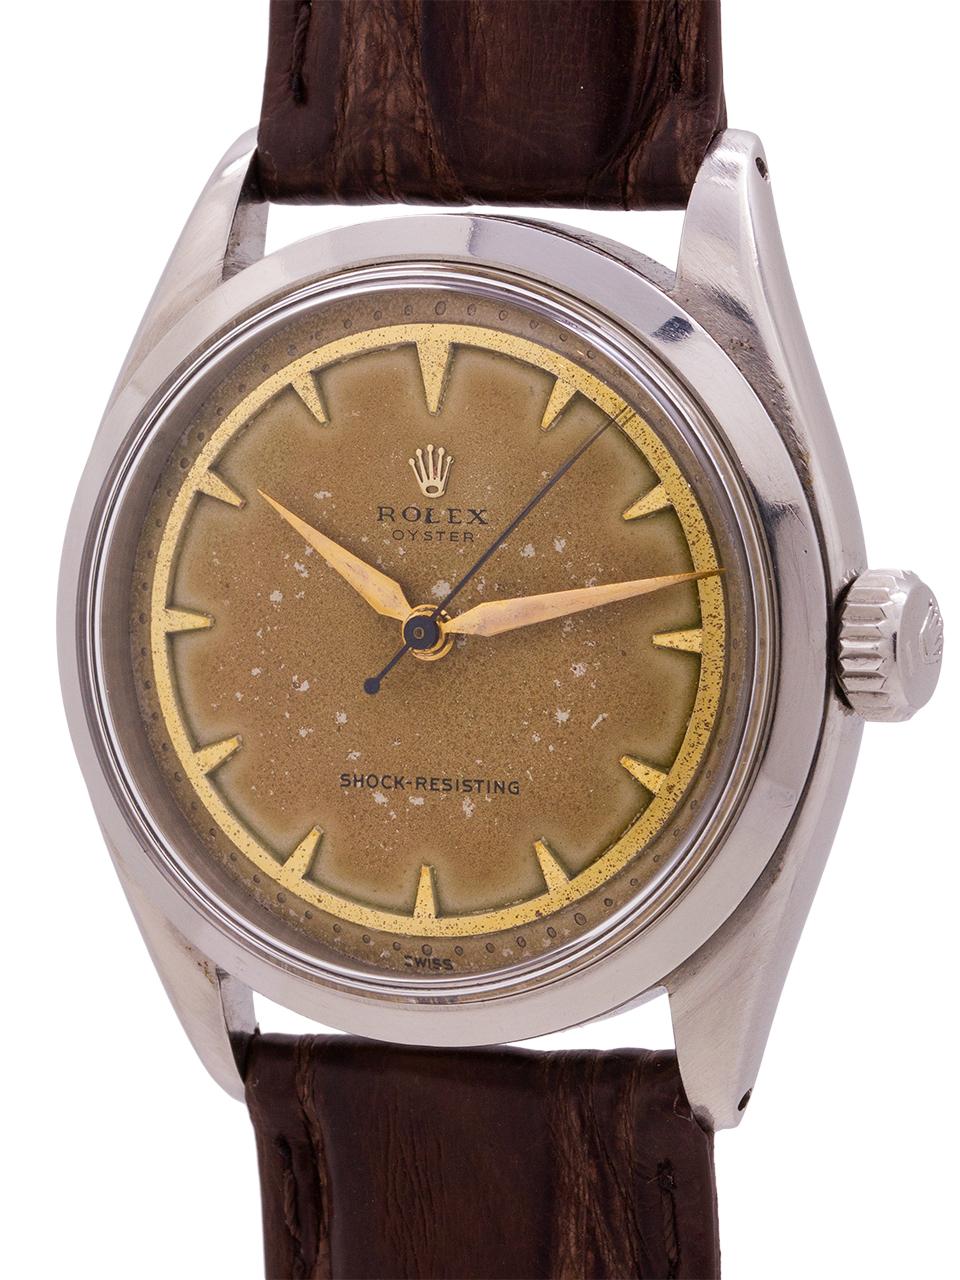 Rolex Oyster reference# 6480, serial# 94,xxx circa 1955. Featuring a 34mm diameter case with smooth bezel and acrylic crystal. Unbelievably rare dial configuration, with heavy patina. On this Oyster the pointed hour markers all sit inside one